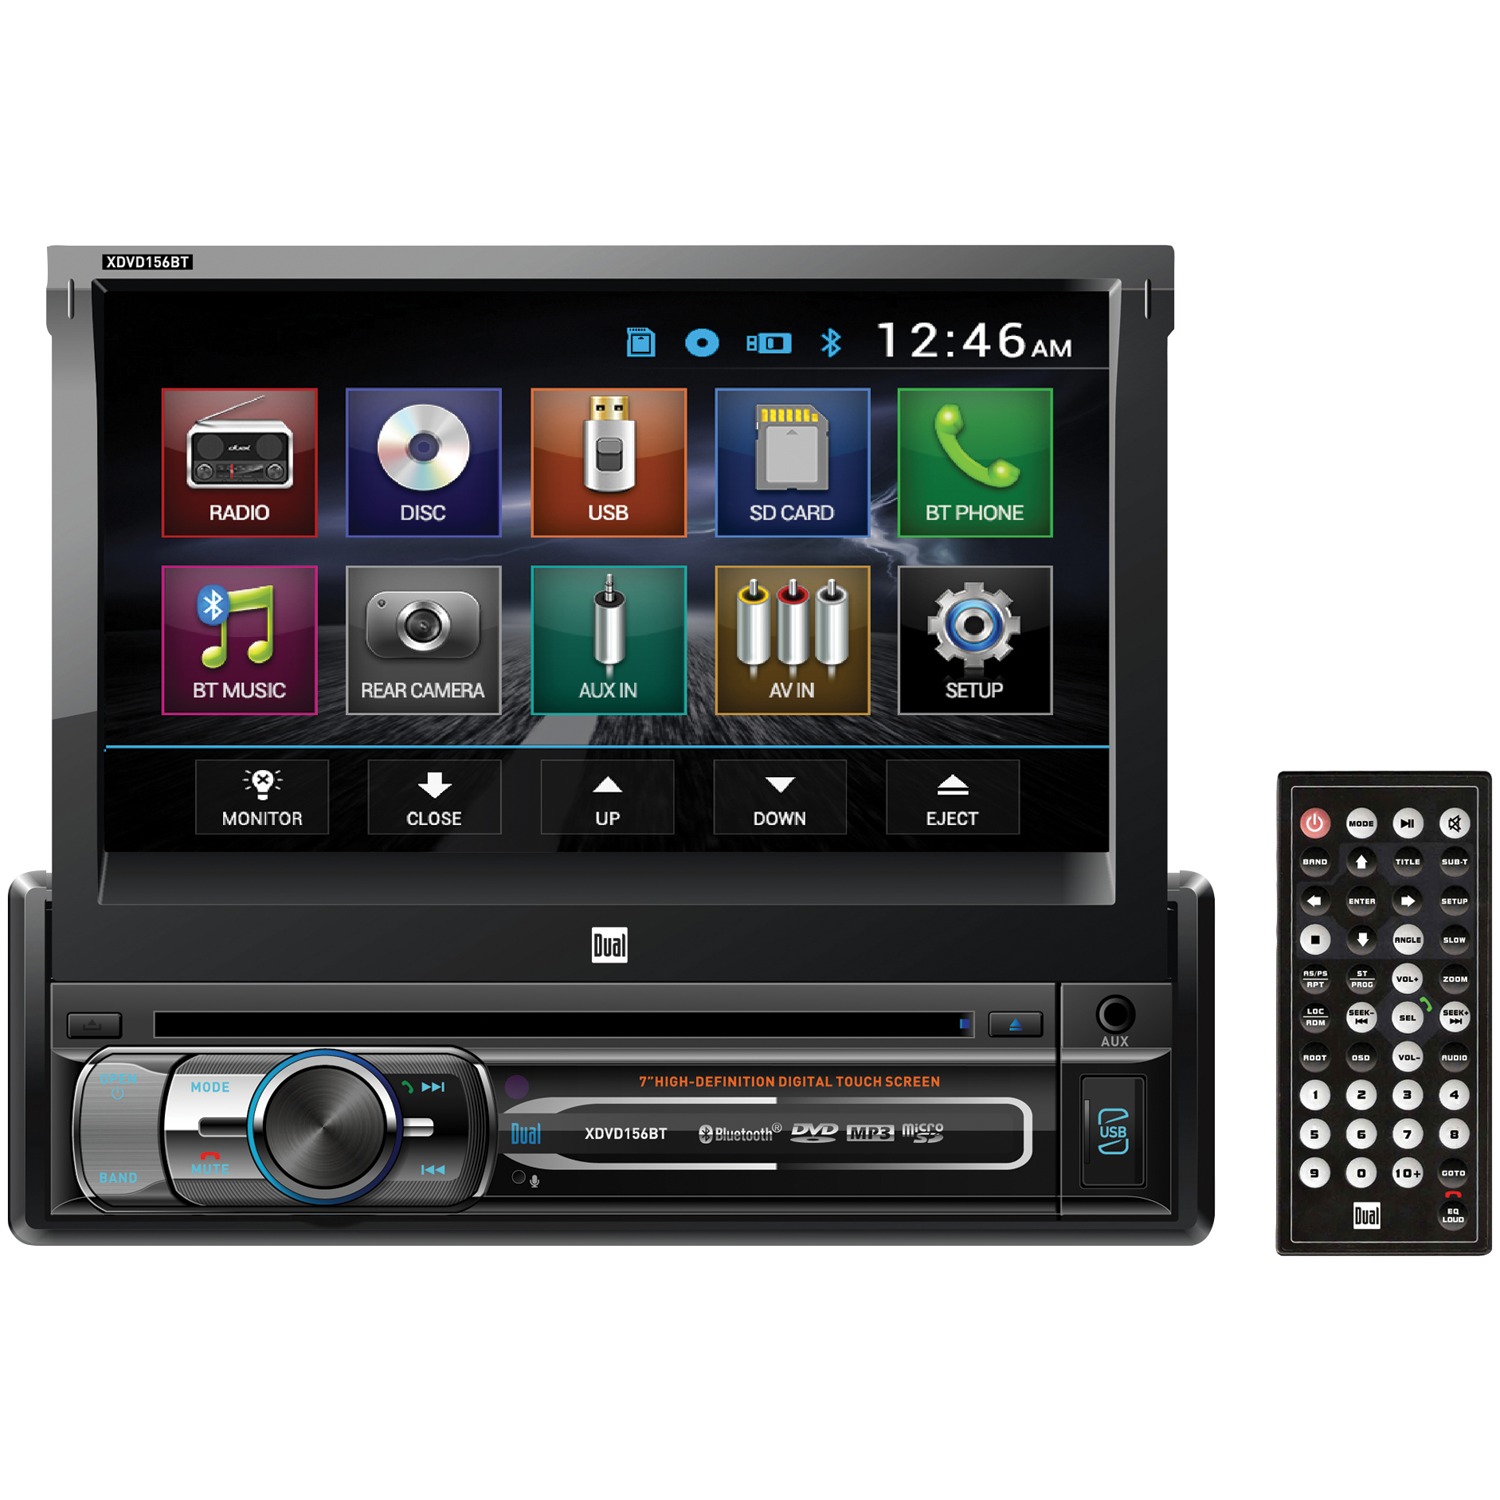 Dual XDVD156BT 7" Single-Din DVD Receiver with Motorized Touchscreen, New - image 4 of 4